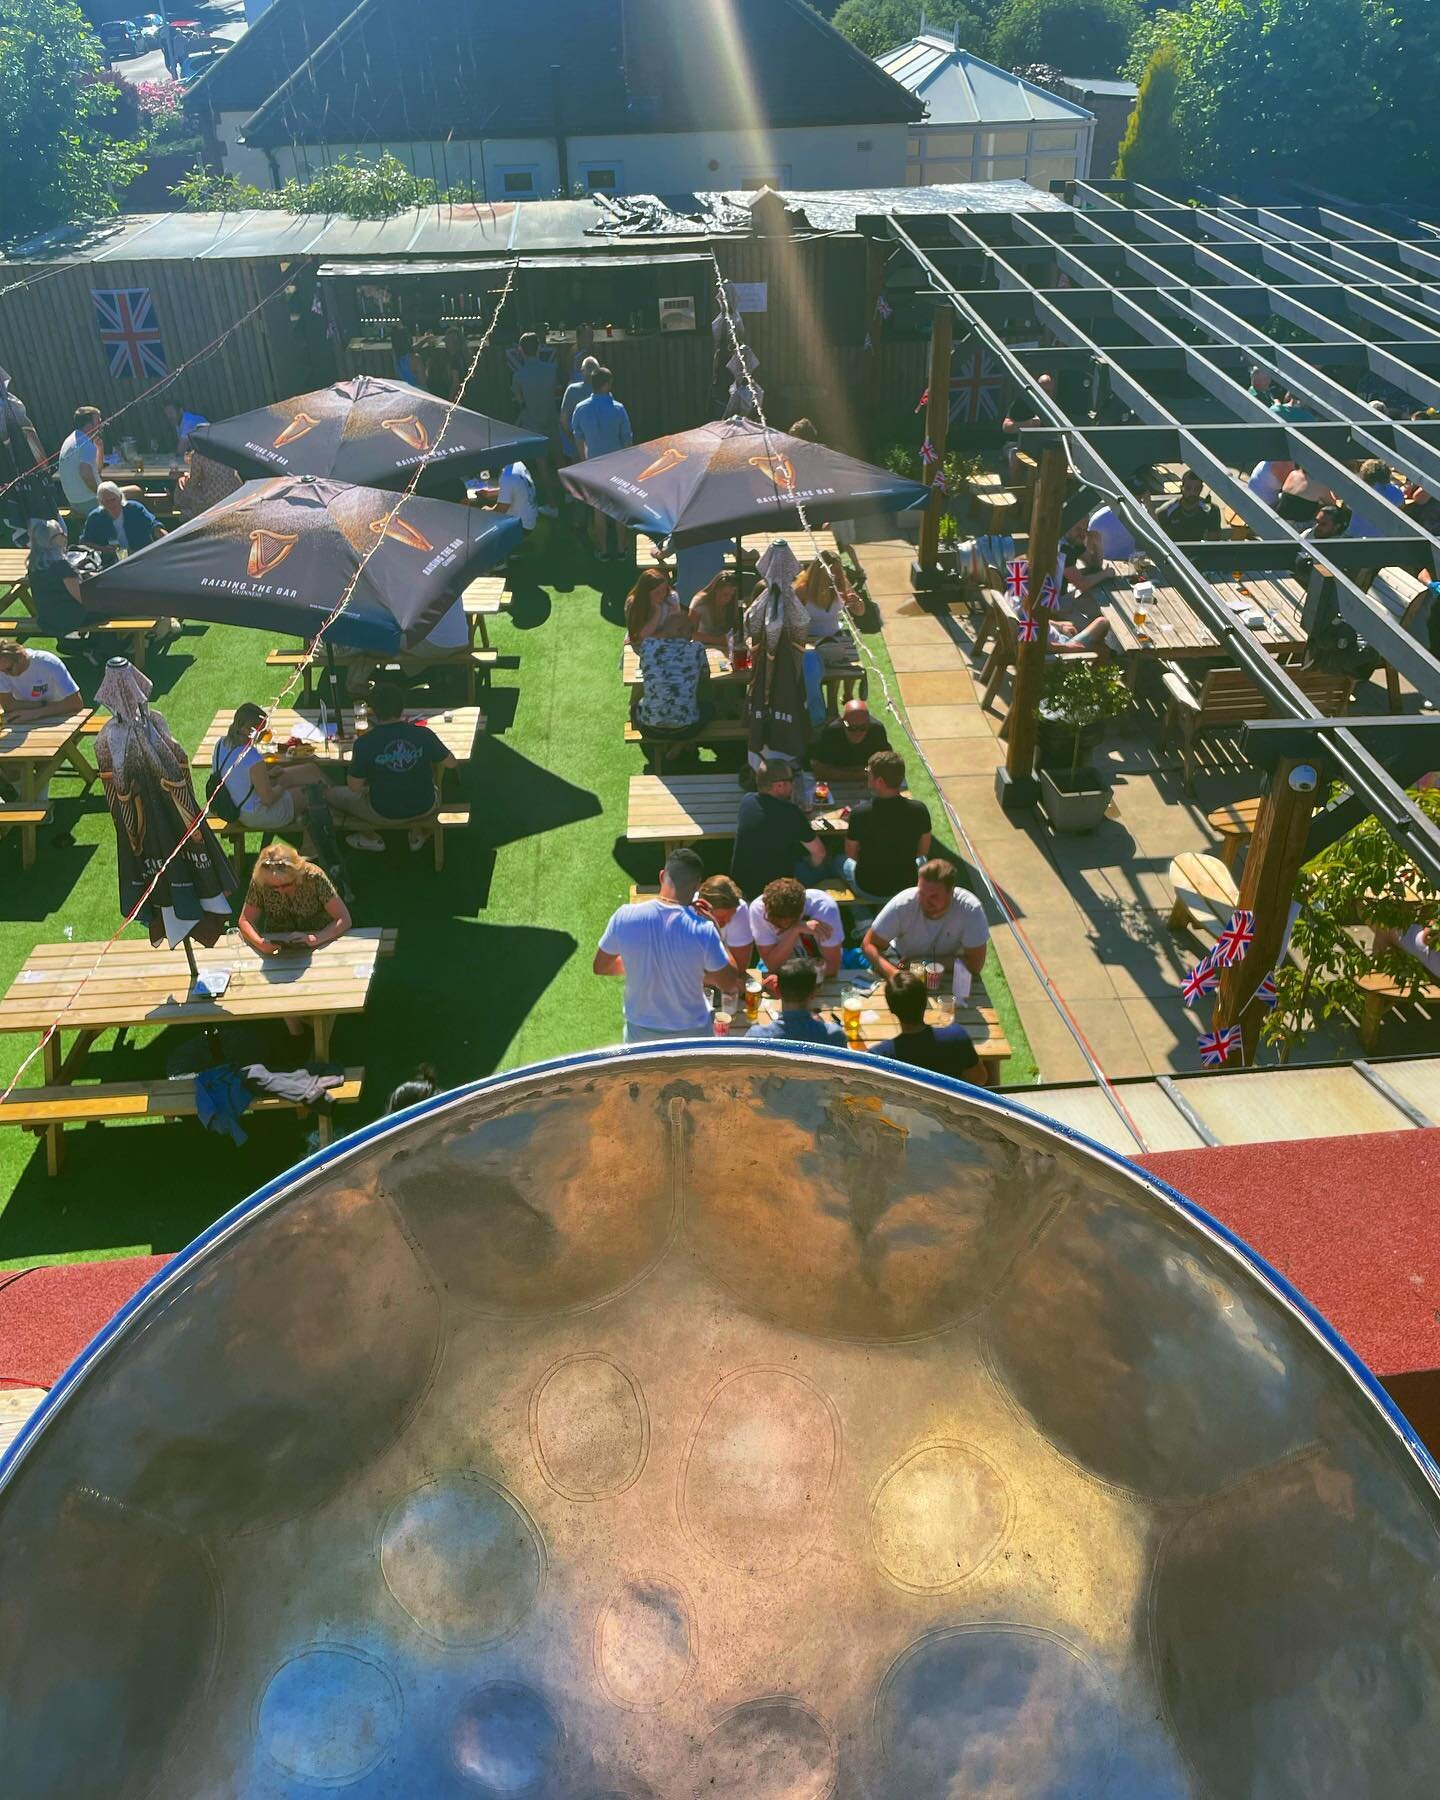 Straight from the plane to the roof! 🛬🔆😎🤝 Were you there? 🥵🍍🍹#OiOi #Worldwide #WhatThatPanDo #FakePanBusta #Terrace #Jubilee #Perfect #Sunny #Steelband #Steelpan #Steeldrums